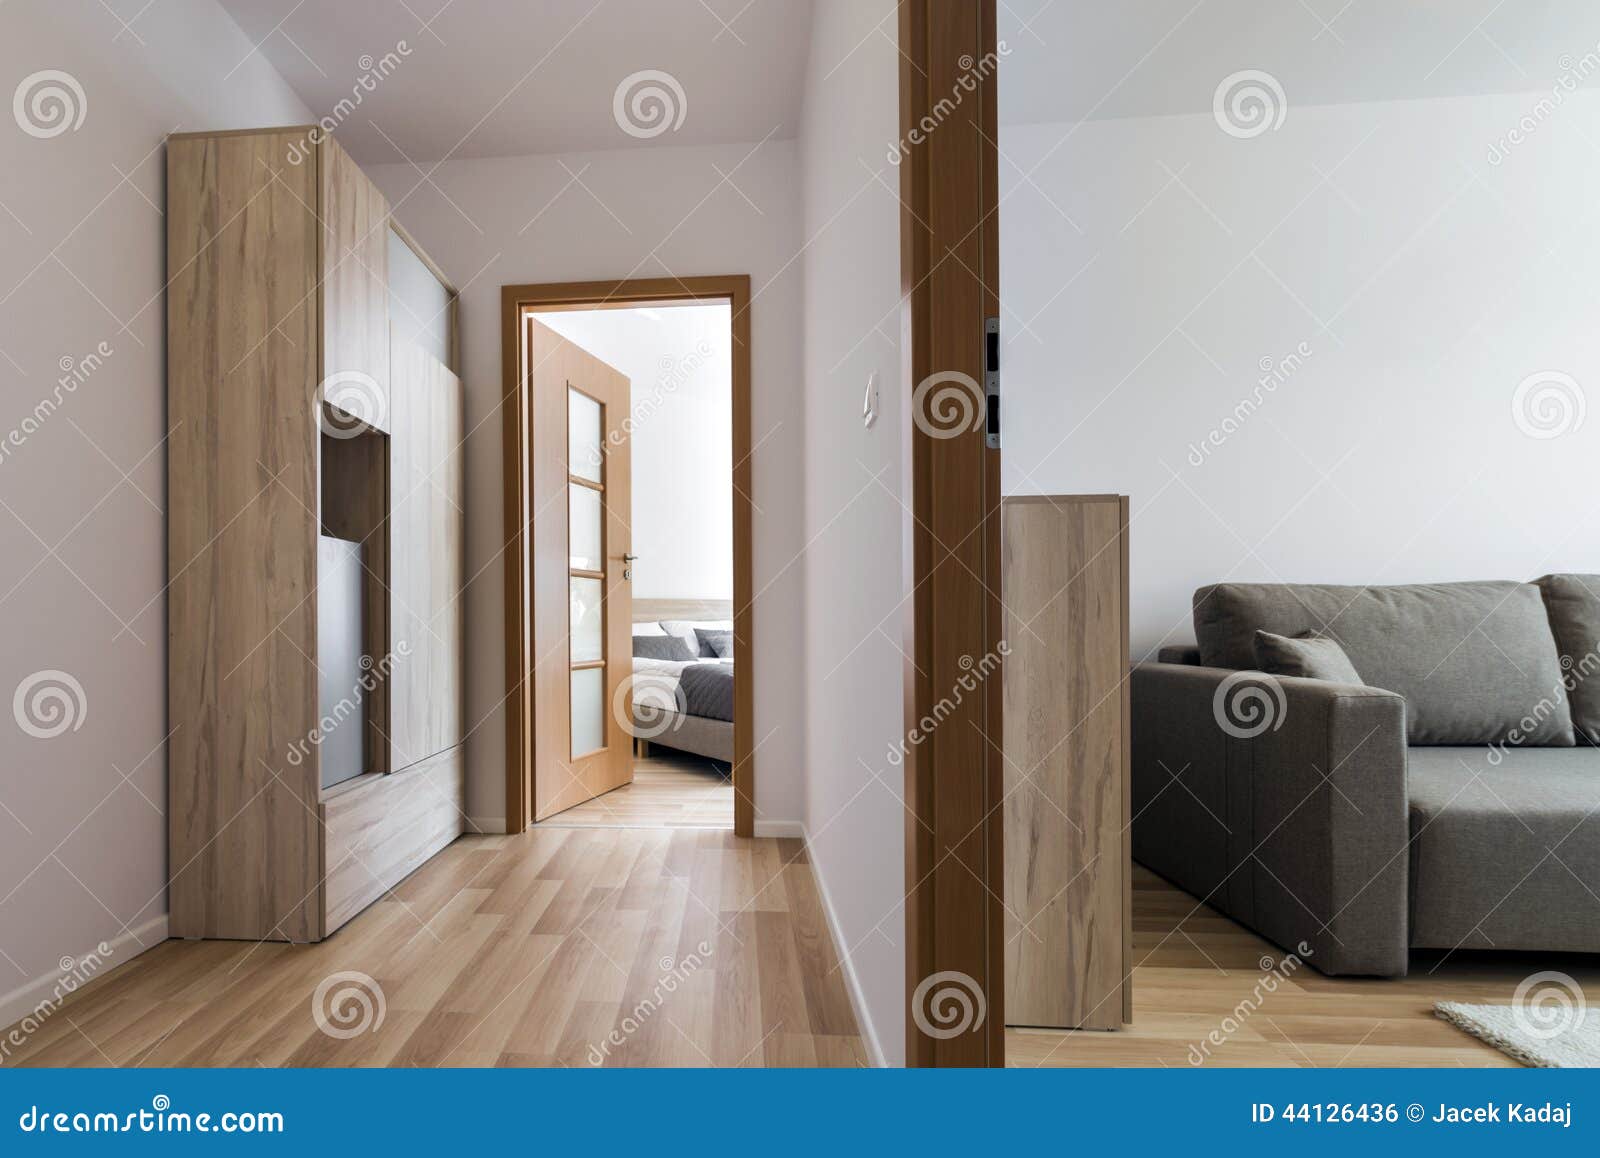 Two Modern Simple Design Rooms Stock Photo Image Of Hotel